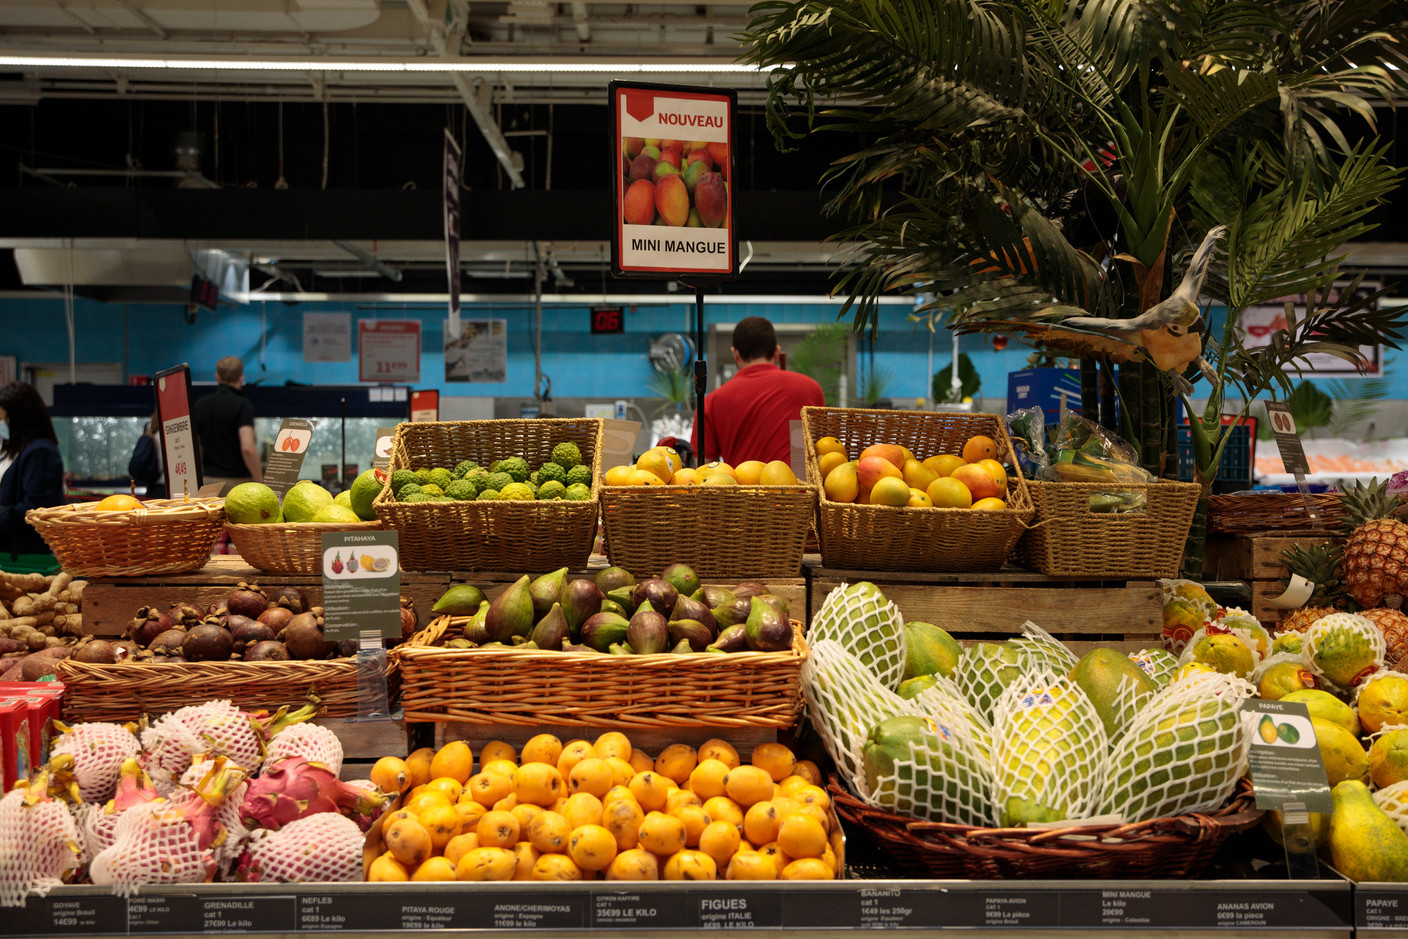 Efforts still need to be made in terms of the consumption of fruits and vegetables, found the OECD health report published on 5 December. 48% of adults in Luxembourg do not eat fruits and vegetables daily. Photo: Matic Zorman / Maison Moderne